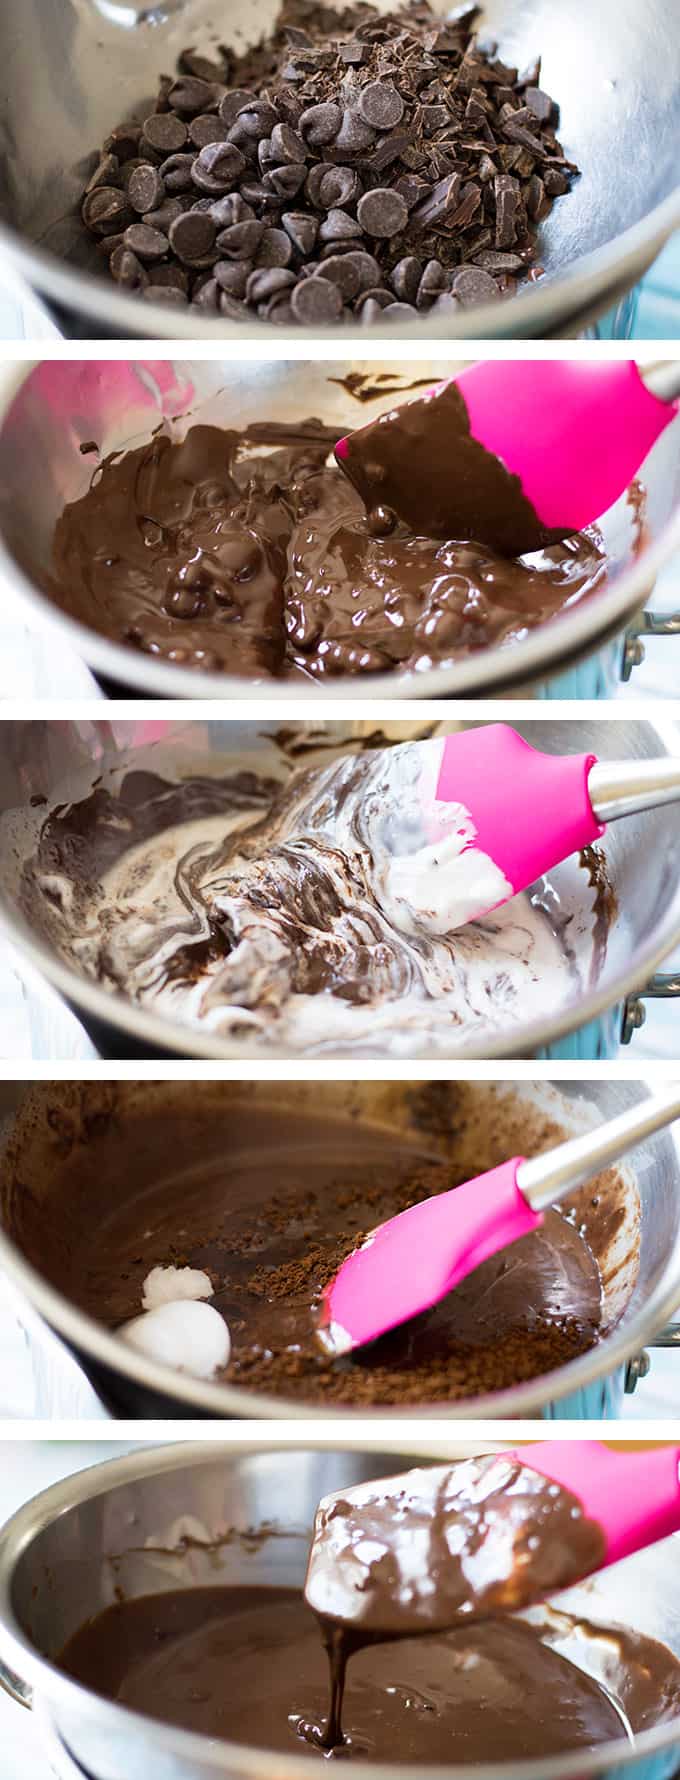 A collage of multiple photos of chocolate melting into a ganache.